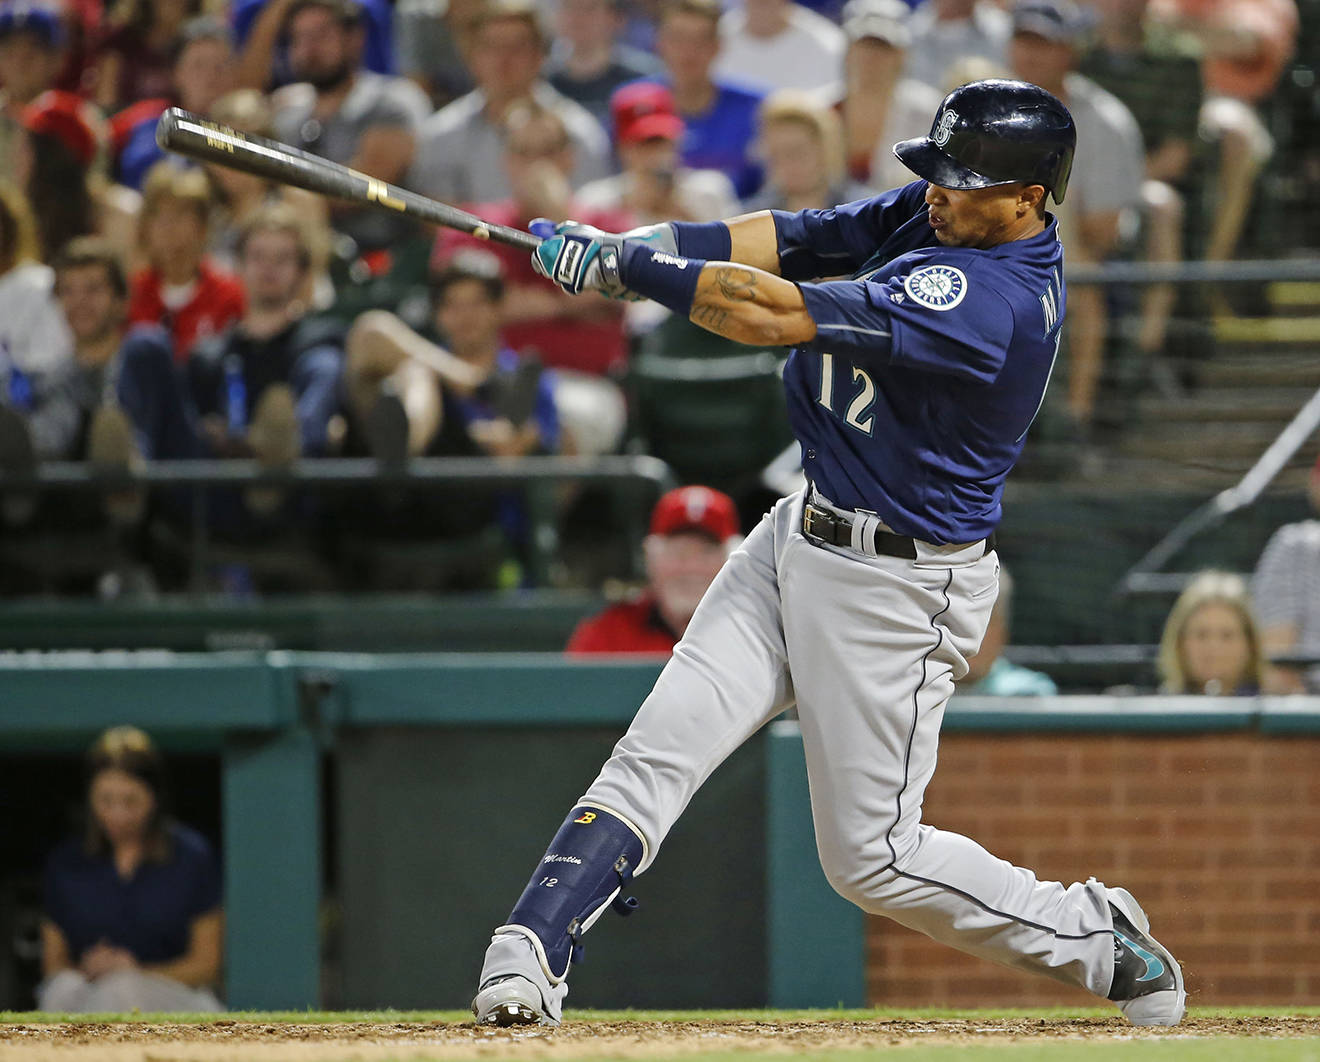 (Paul Moseley | Fort Worth Star-Telegram)                                Seattle’s Leonys Martin, seen here in Texas early last season, has worked on his swing and wants to add better offensive numbers this season for the Mariners.